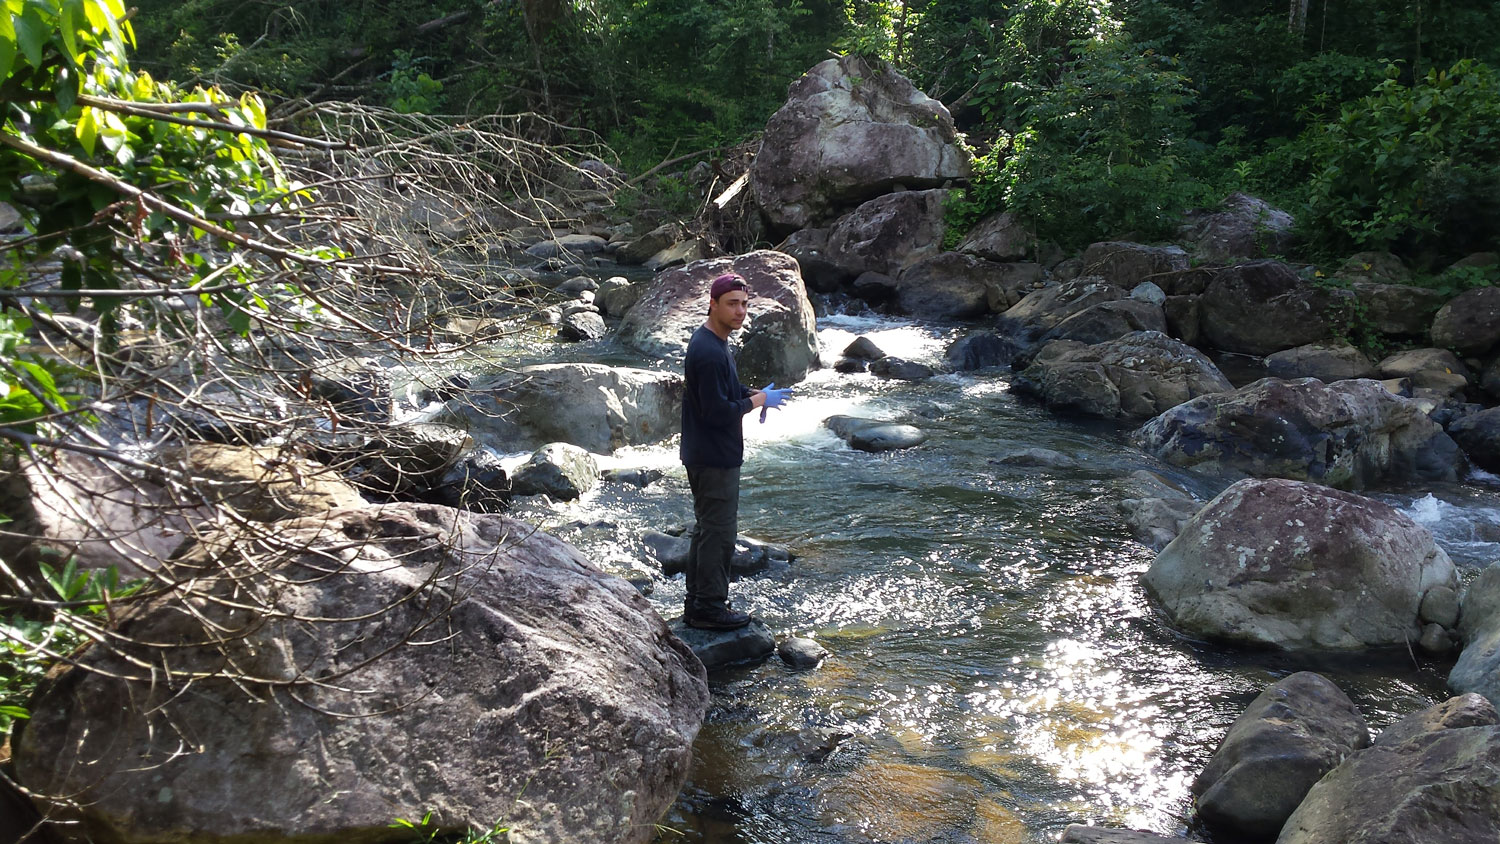 Civil engineering doctoral student Benjamin Davis takes water samples from the Rio Marin River in Patillas, Puerto Rico in early 2018.